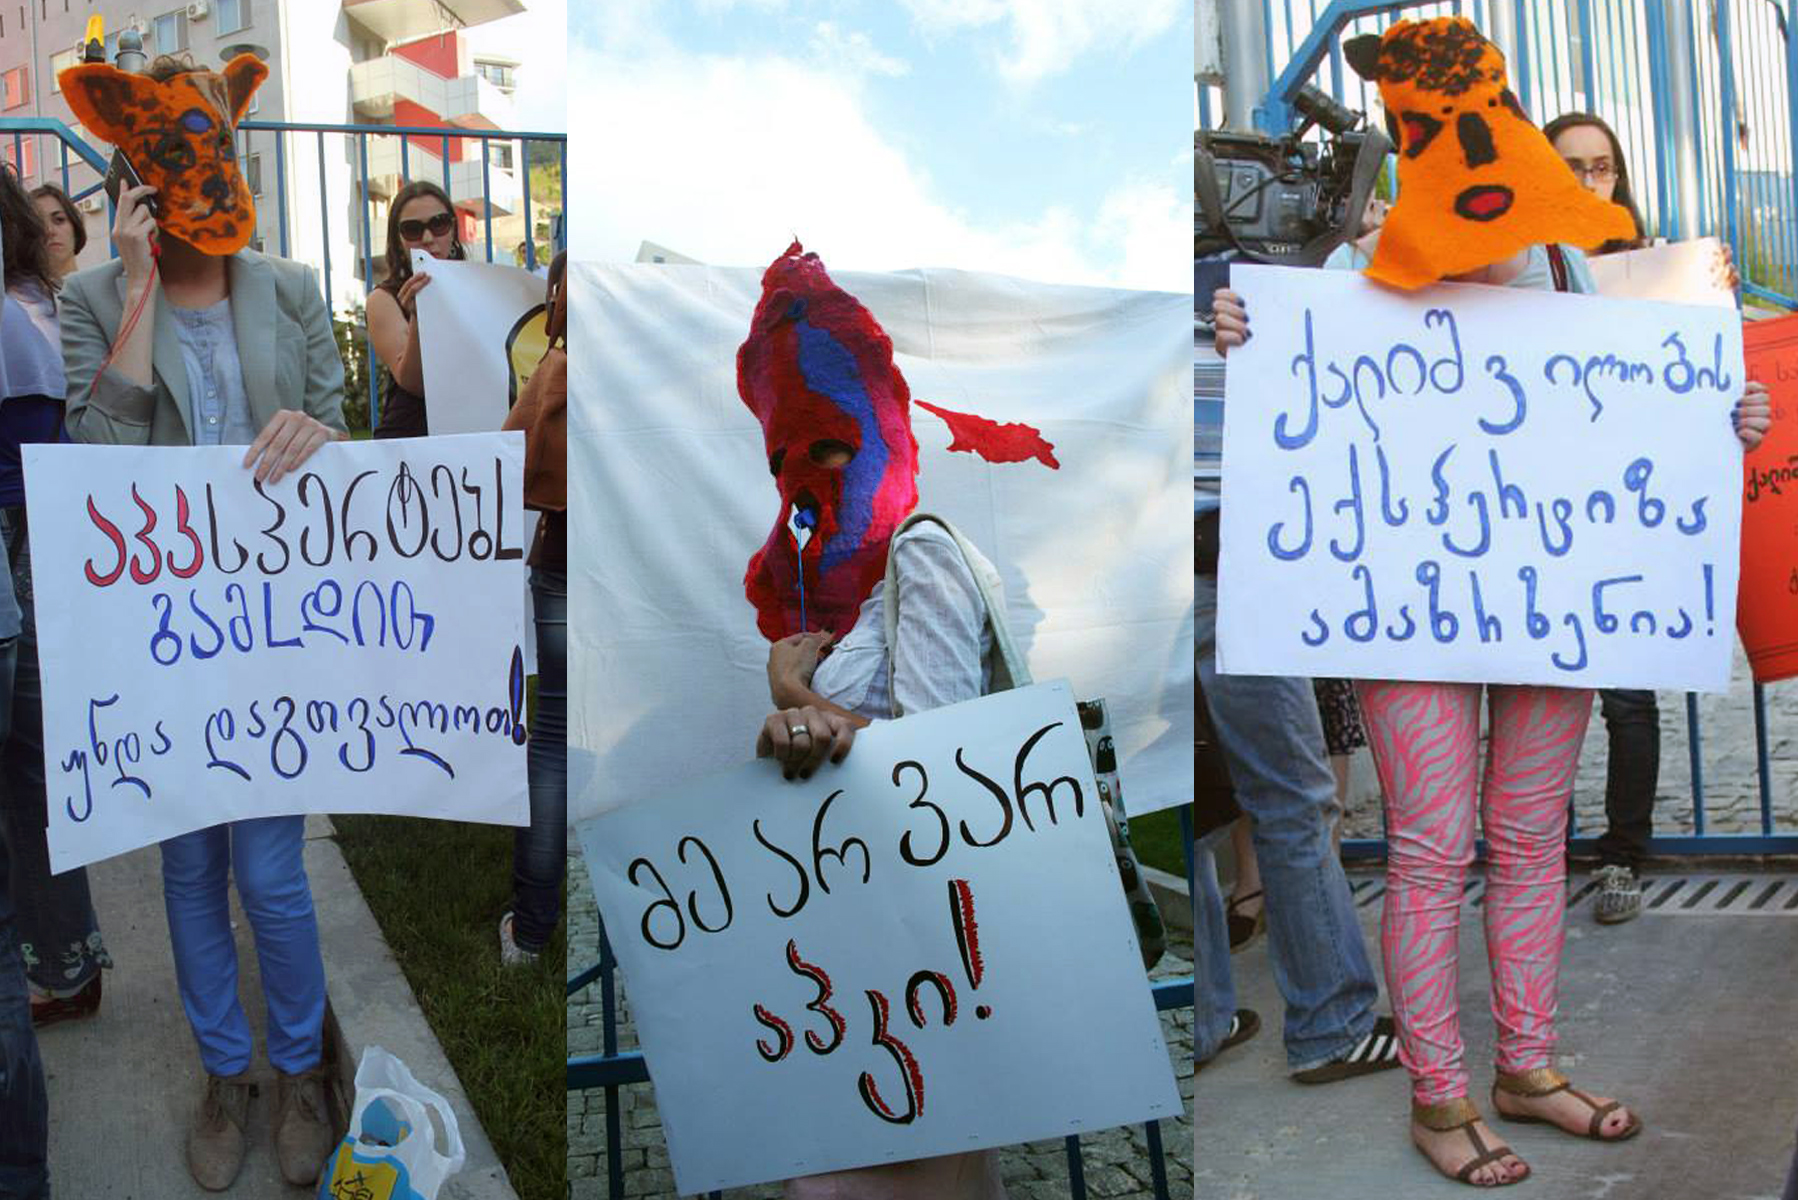   Felted masked activism at protests against virginity testing in Tbilisi.  